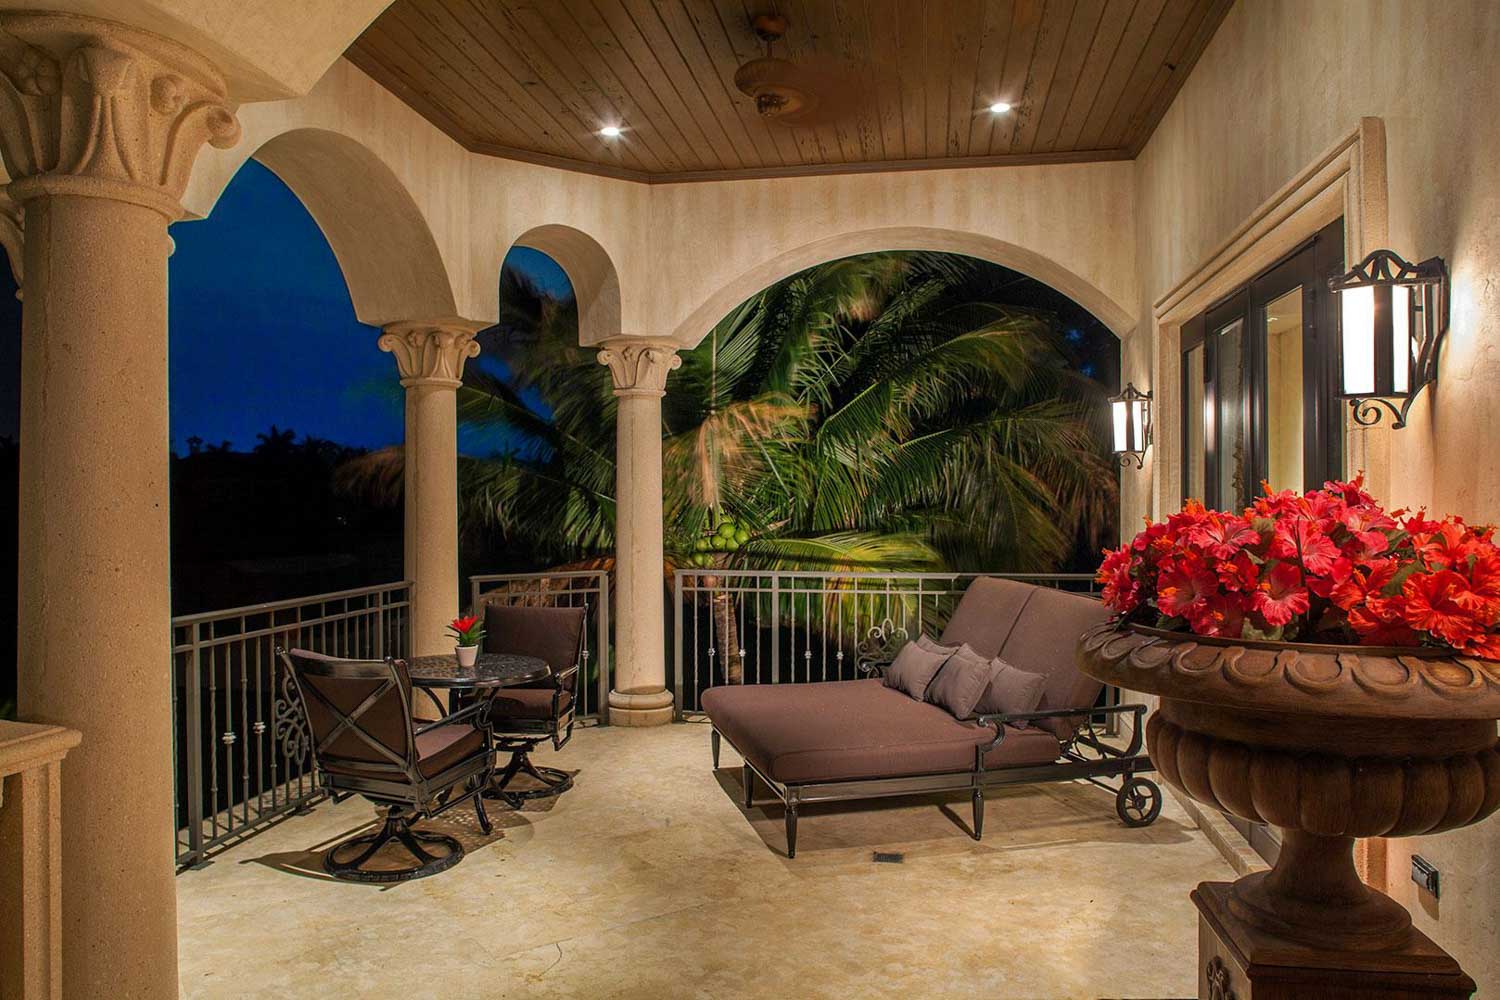 17828 Scarsdale Way - Exterior of Estate Balcony